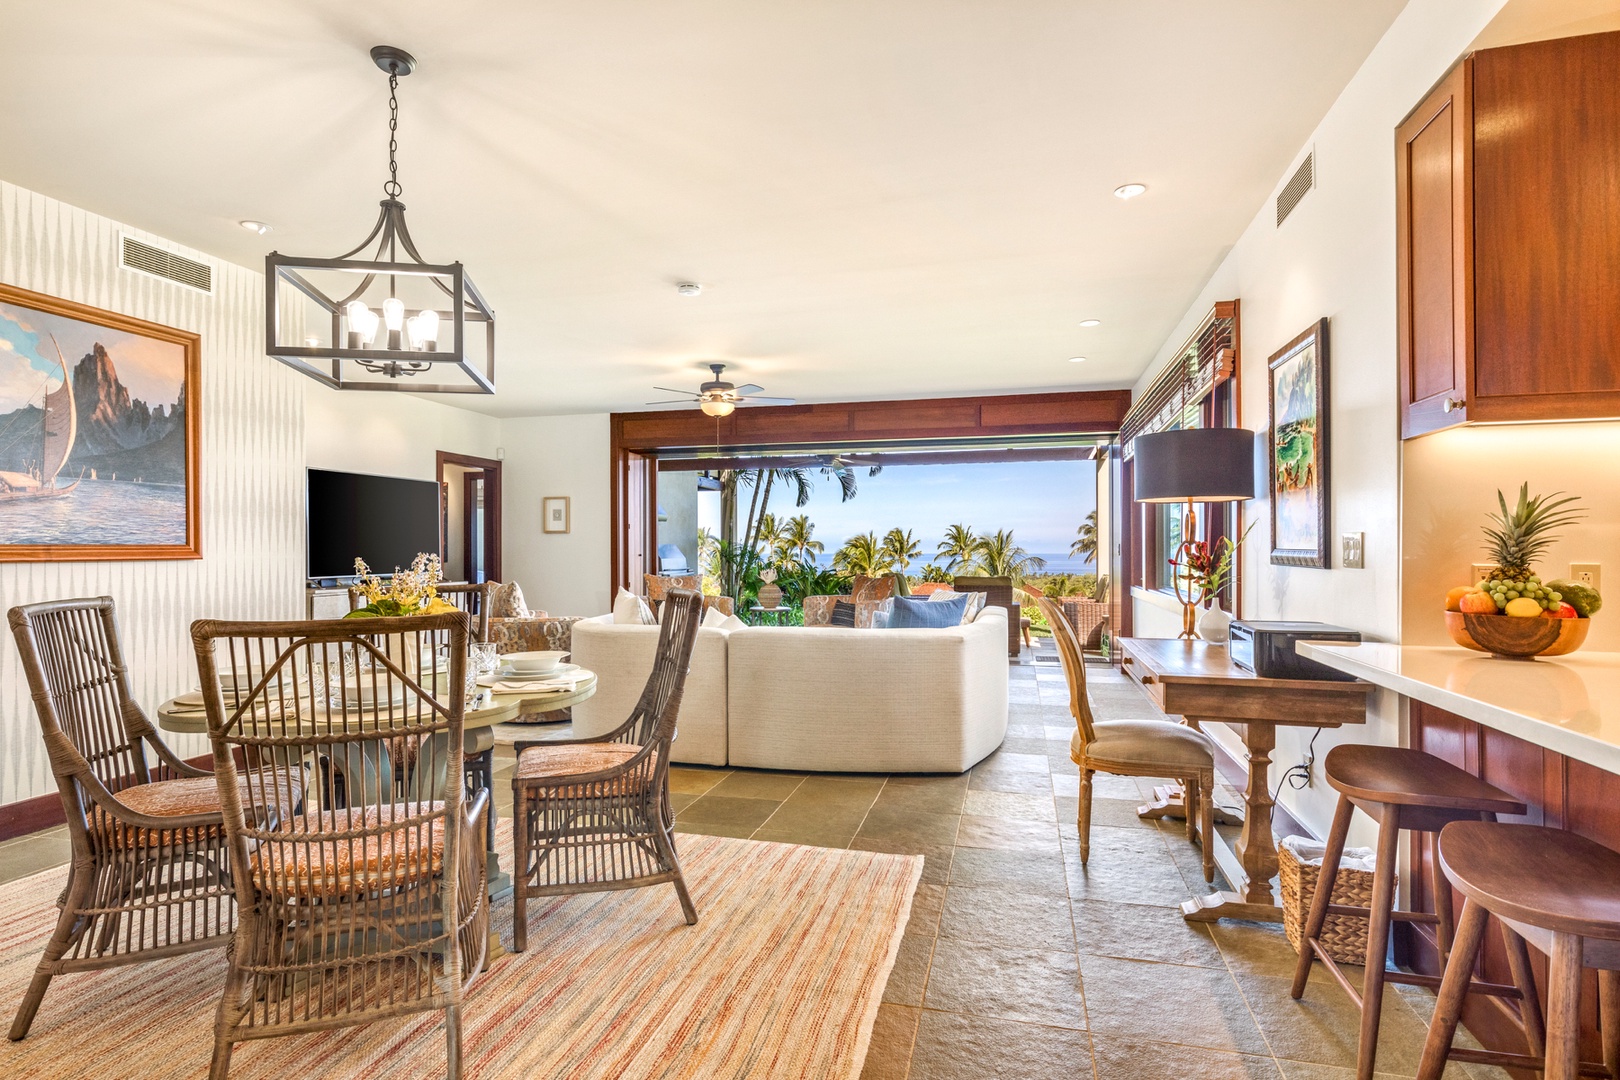 Kailua Kona Vacation Rentals, 3BD Hainoa Villa (2907C) at Four Seasons Resort at Hualalai - Wide view of the gorgeous open concept great room with floor to ceiling pocket doors that open completely to the lanai.